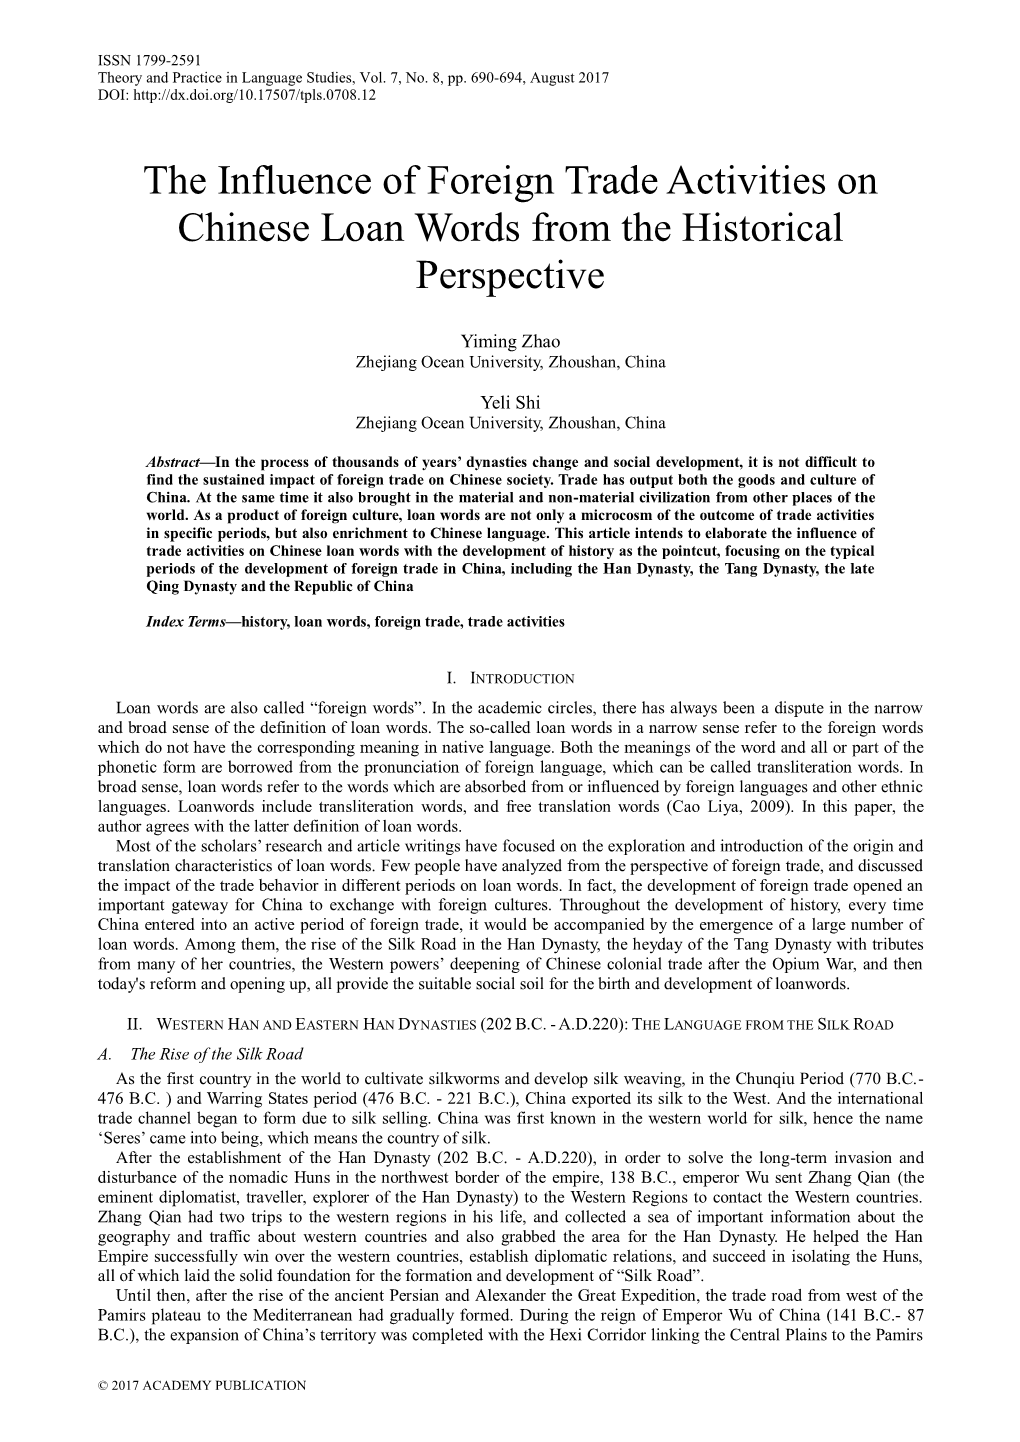 The Influence of Foreign Trade Activities on Chinese Loan Words from the Historical Perspective